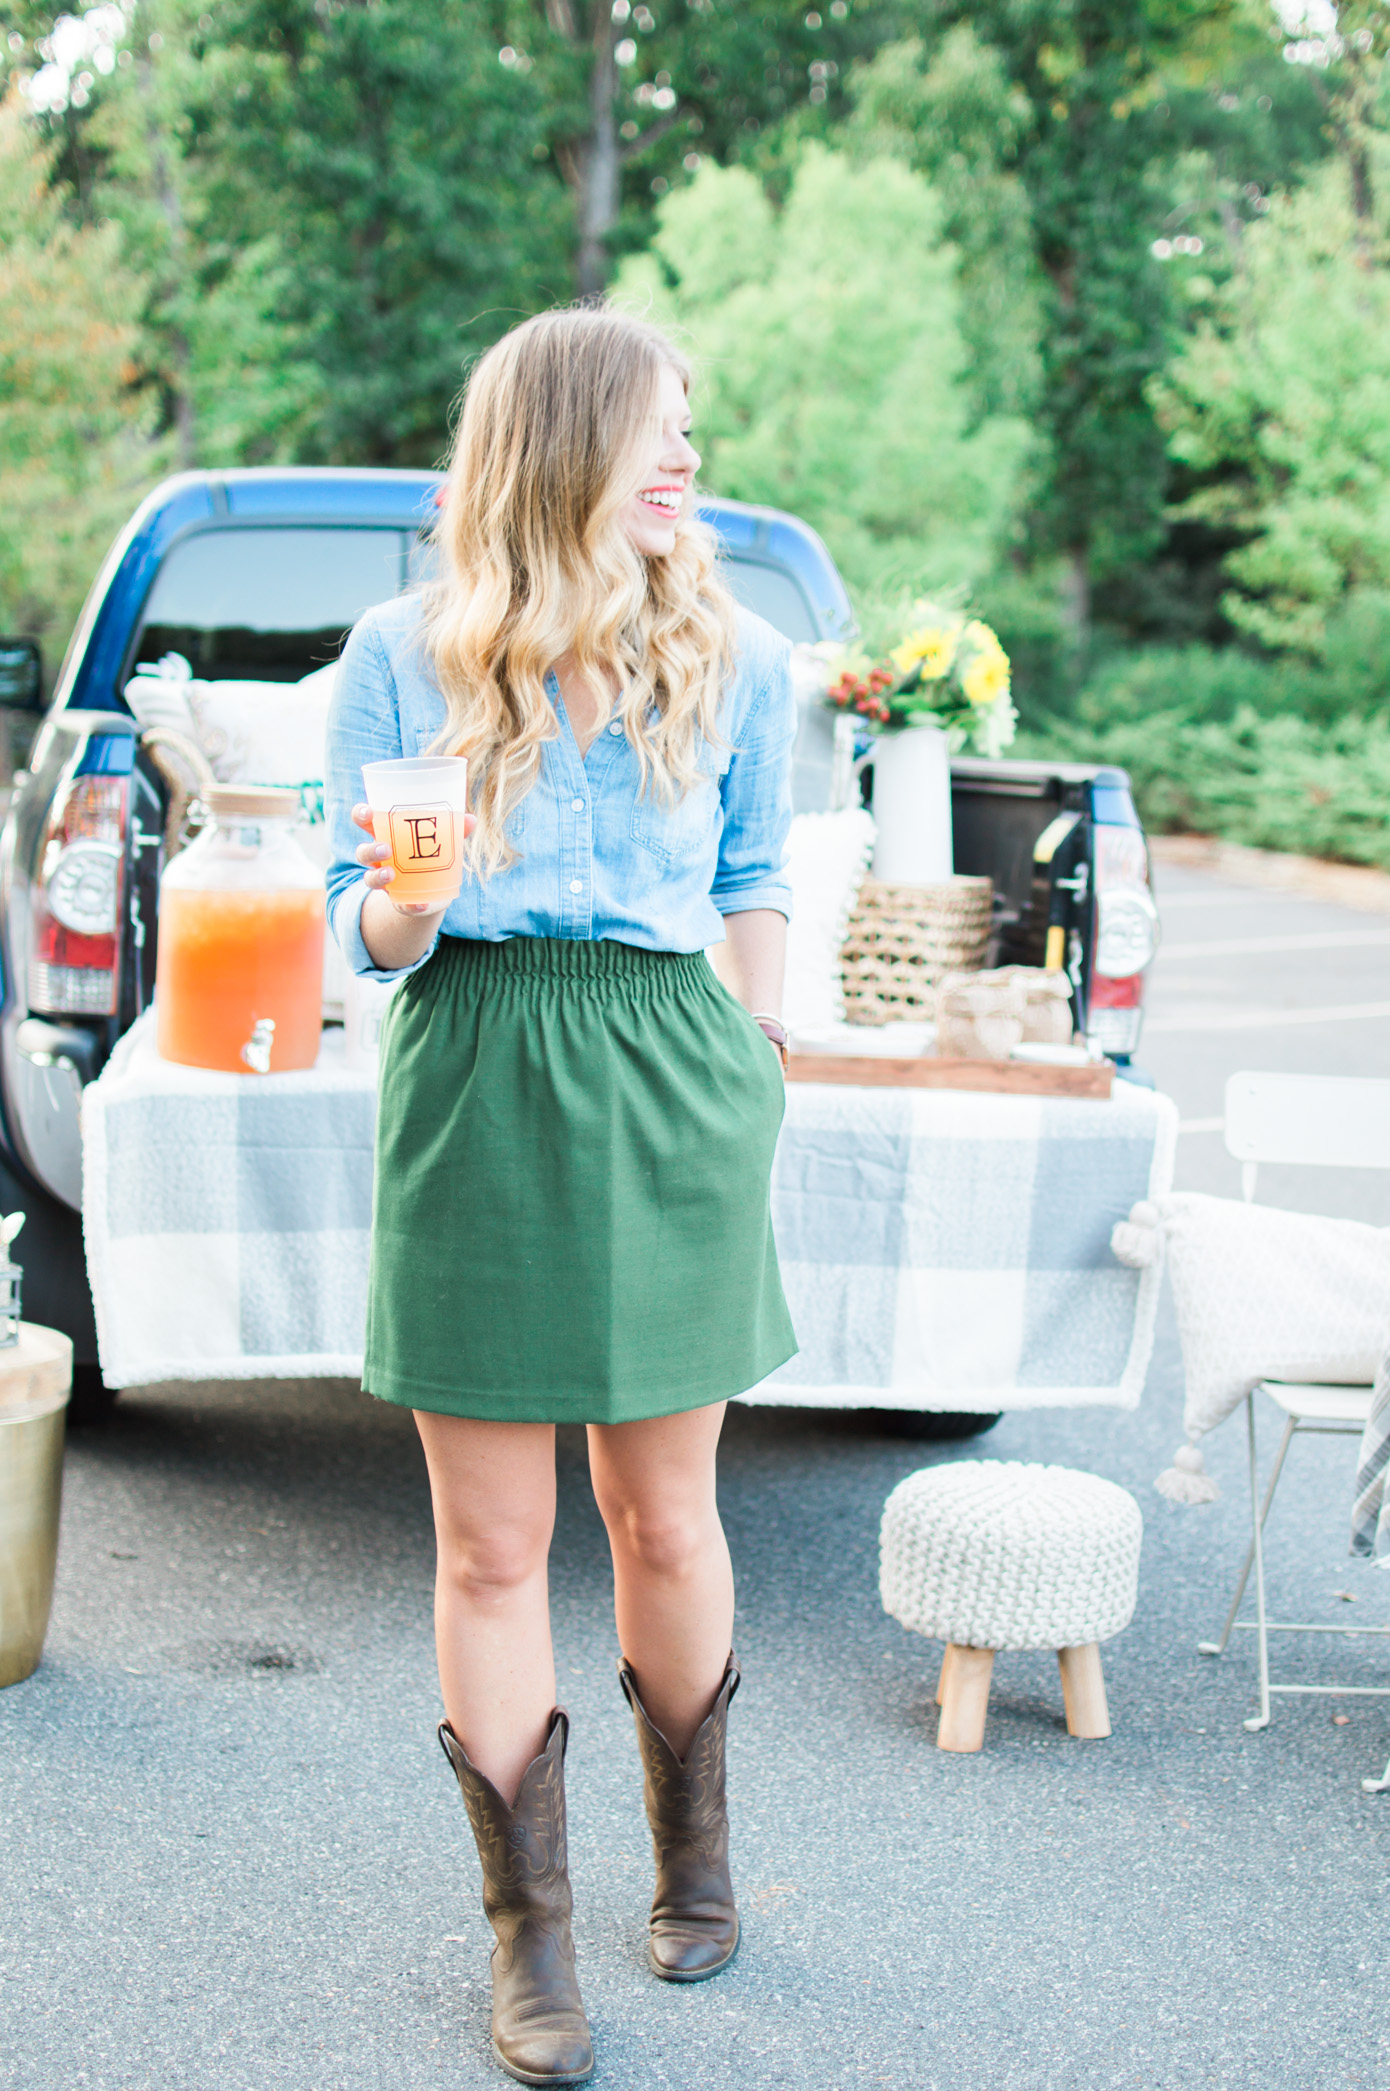 How to Throw a Tailgate Party | Cozy Chic Tailgate | Louella Reese Life & Style Blog